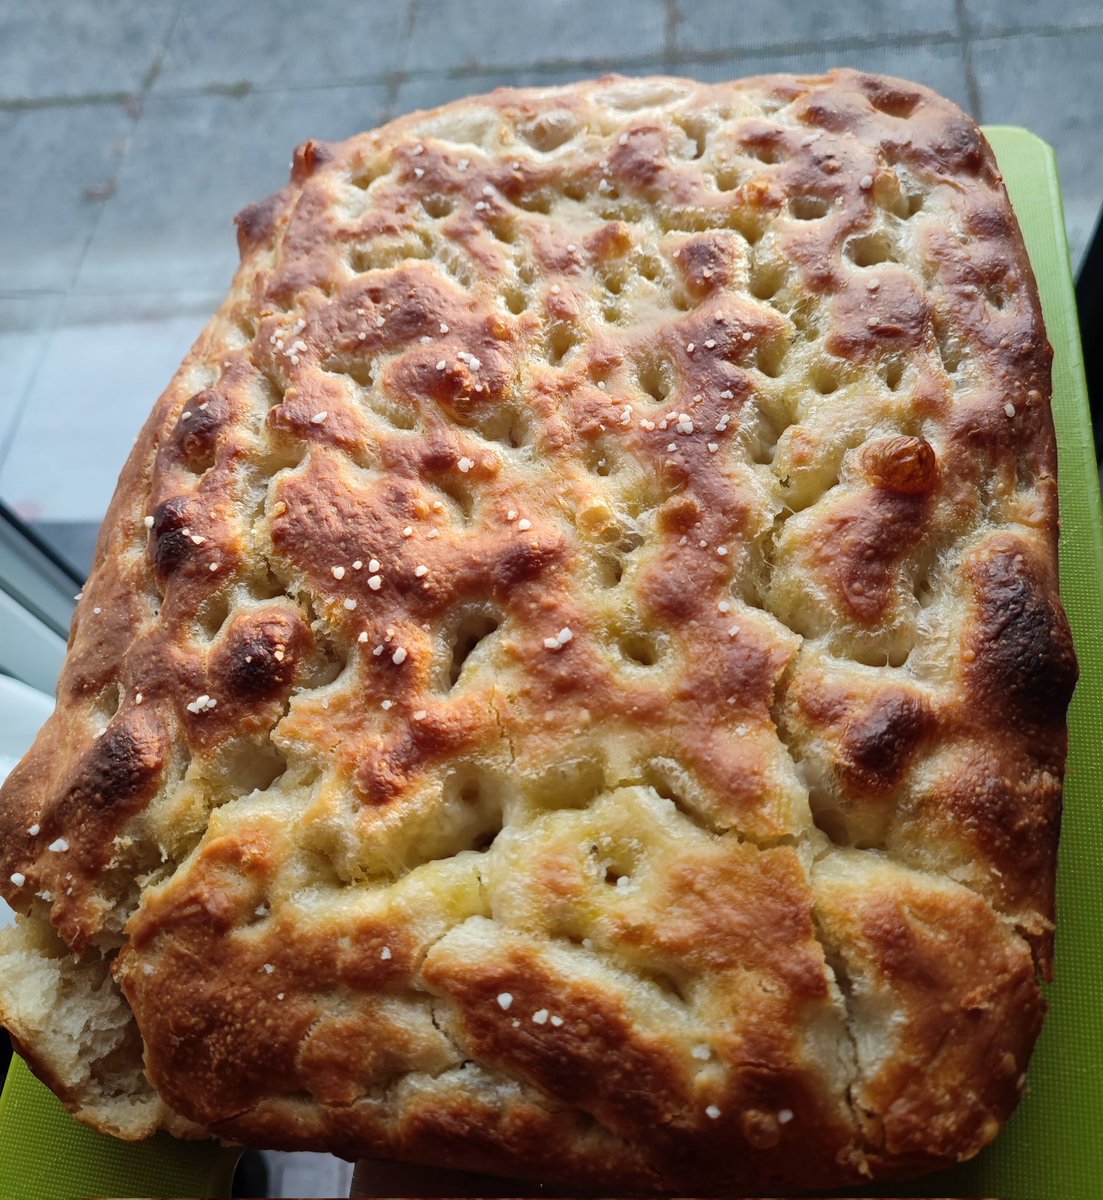 Made a focaccia for @HelloLovers13 and our cheeseplate 😌